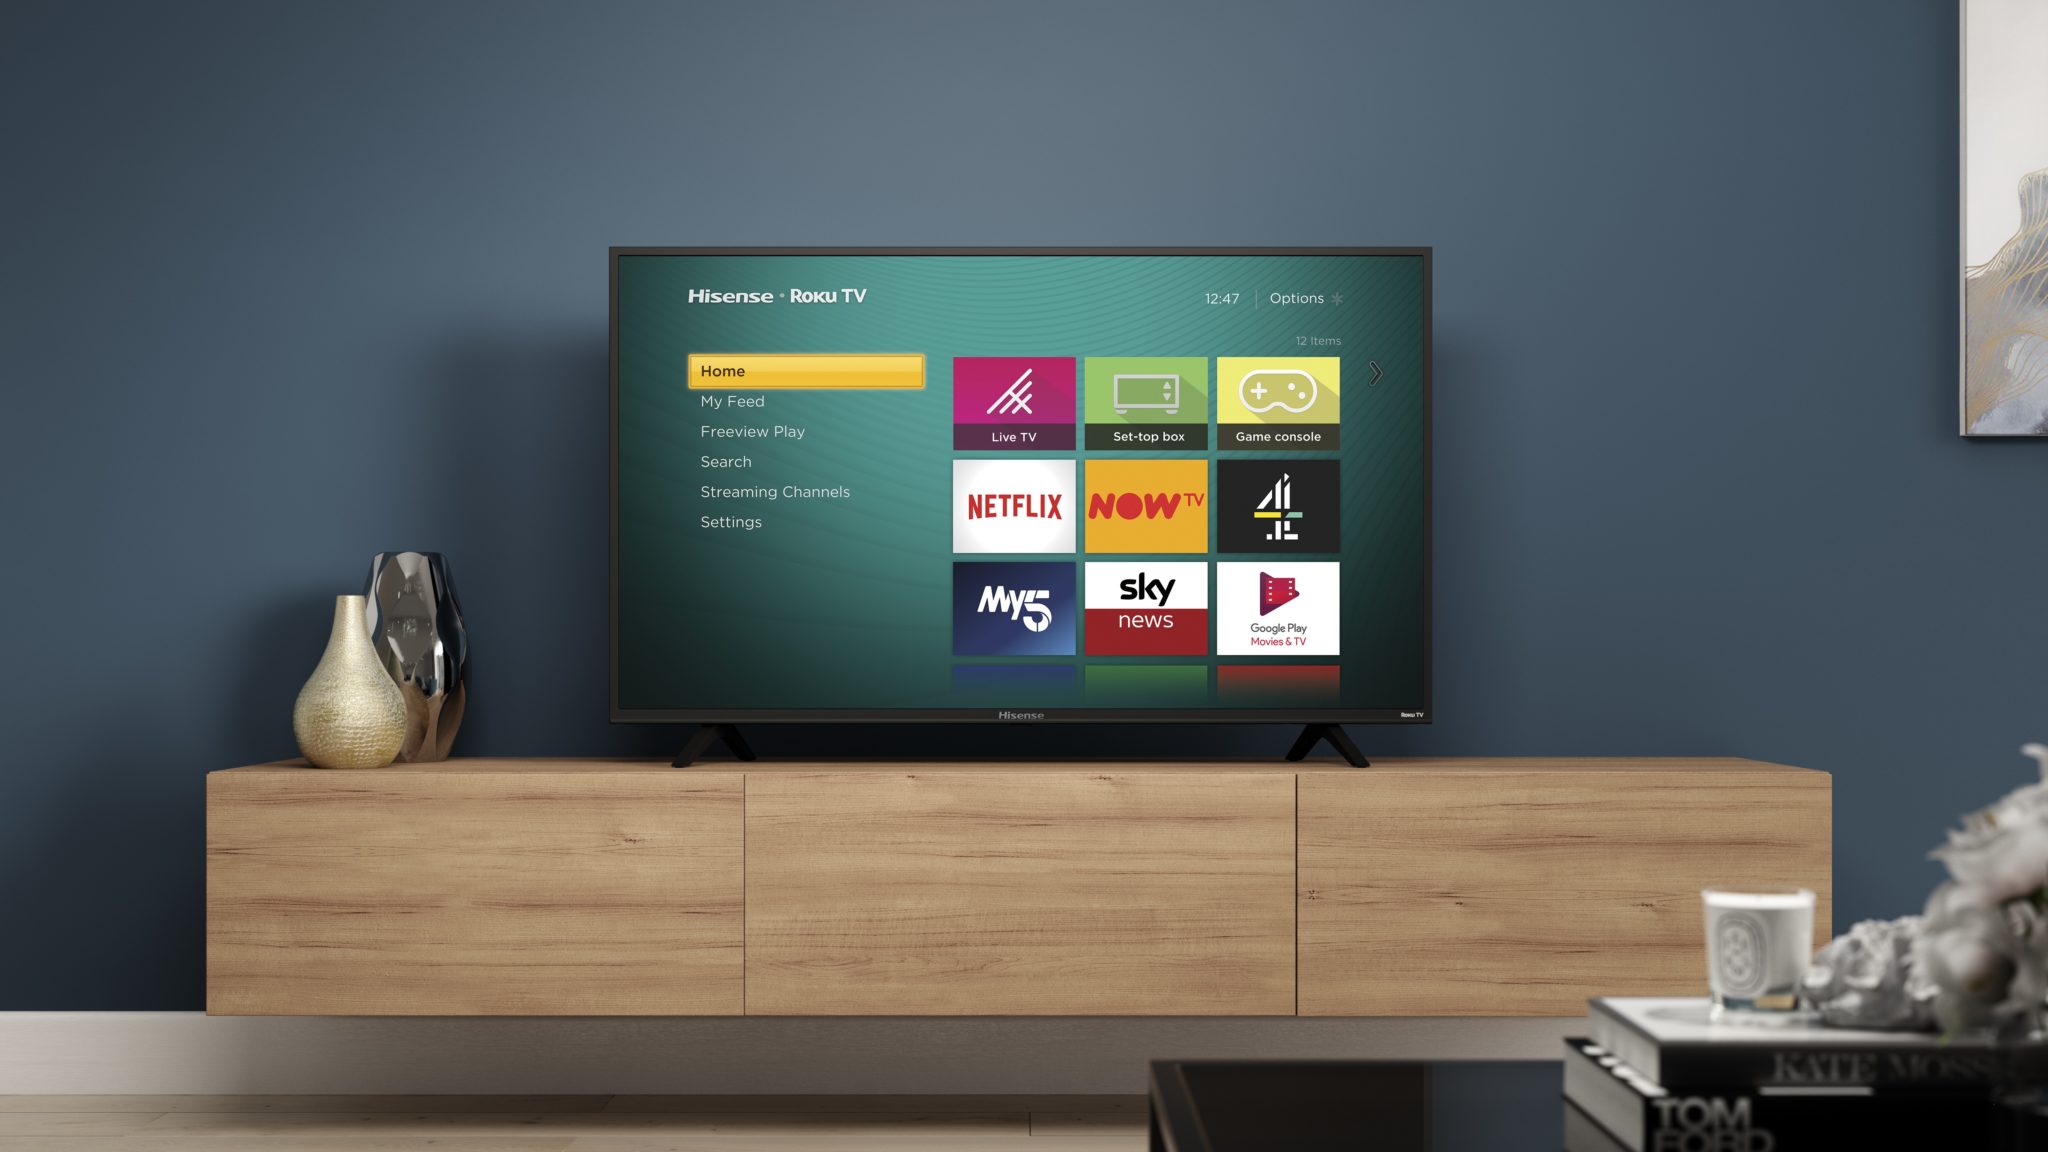 New Hisense Roku TV Models Are Now Available in the UK